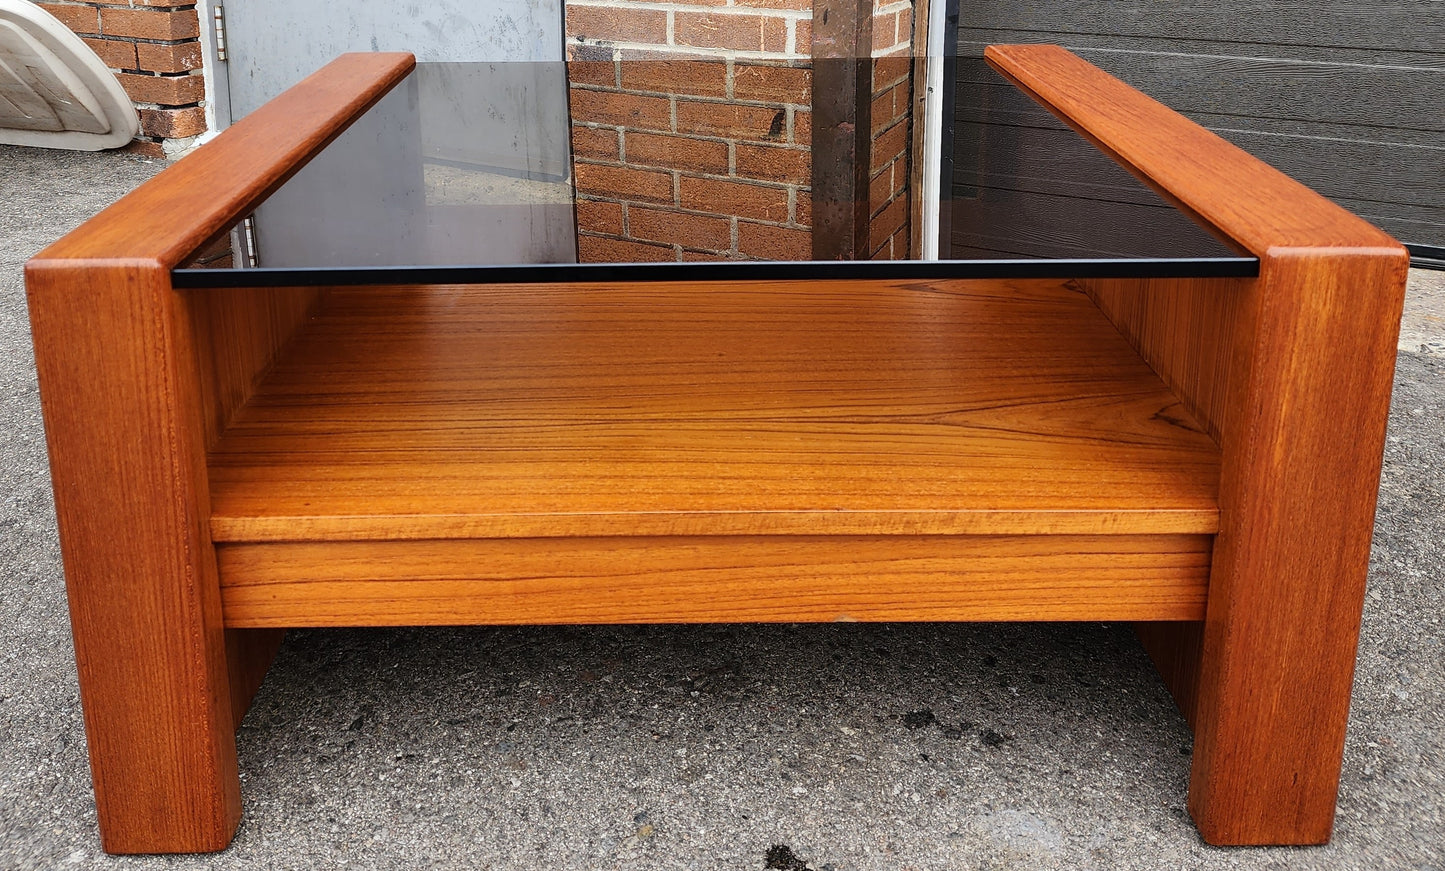 REFINISHED Mid Century Modern Teak & Glass Coffee Table with Storage